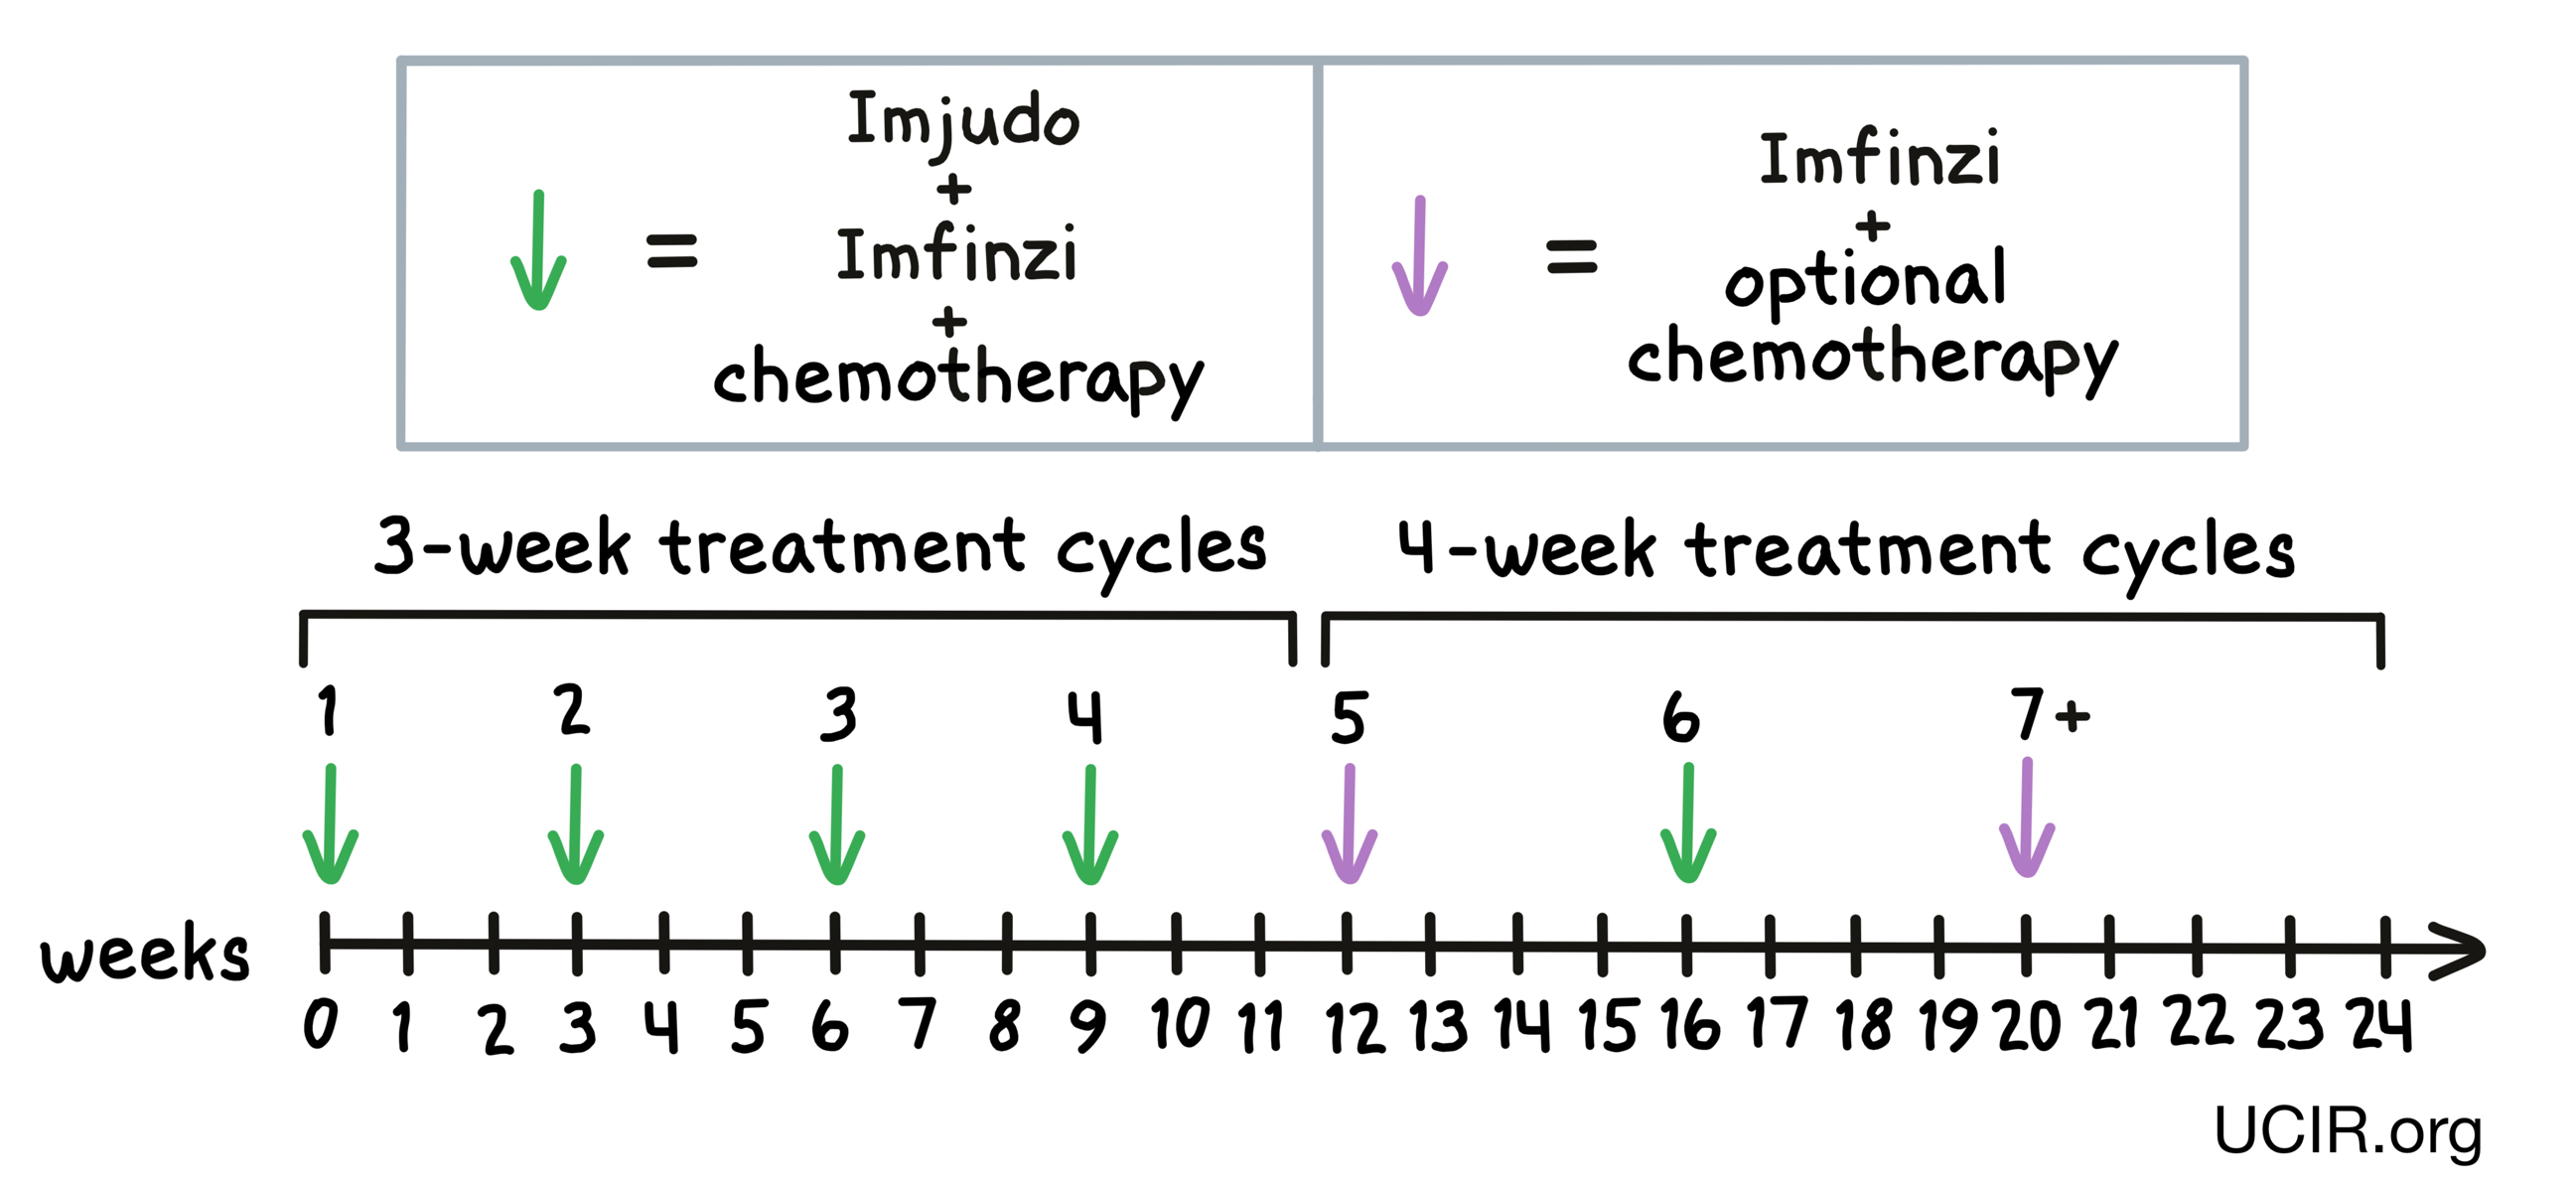 Illustration showing how Imjudo is administered to patients